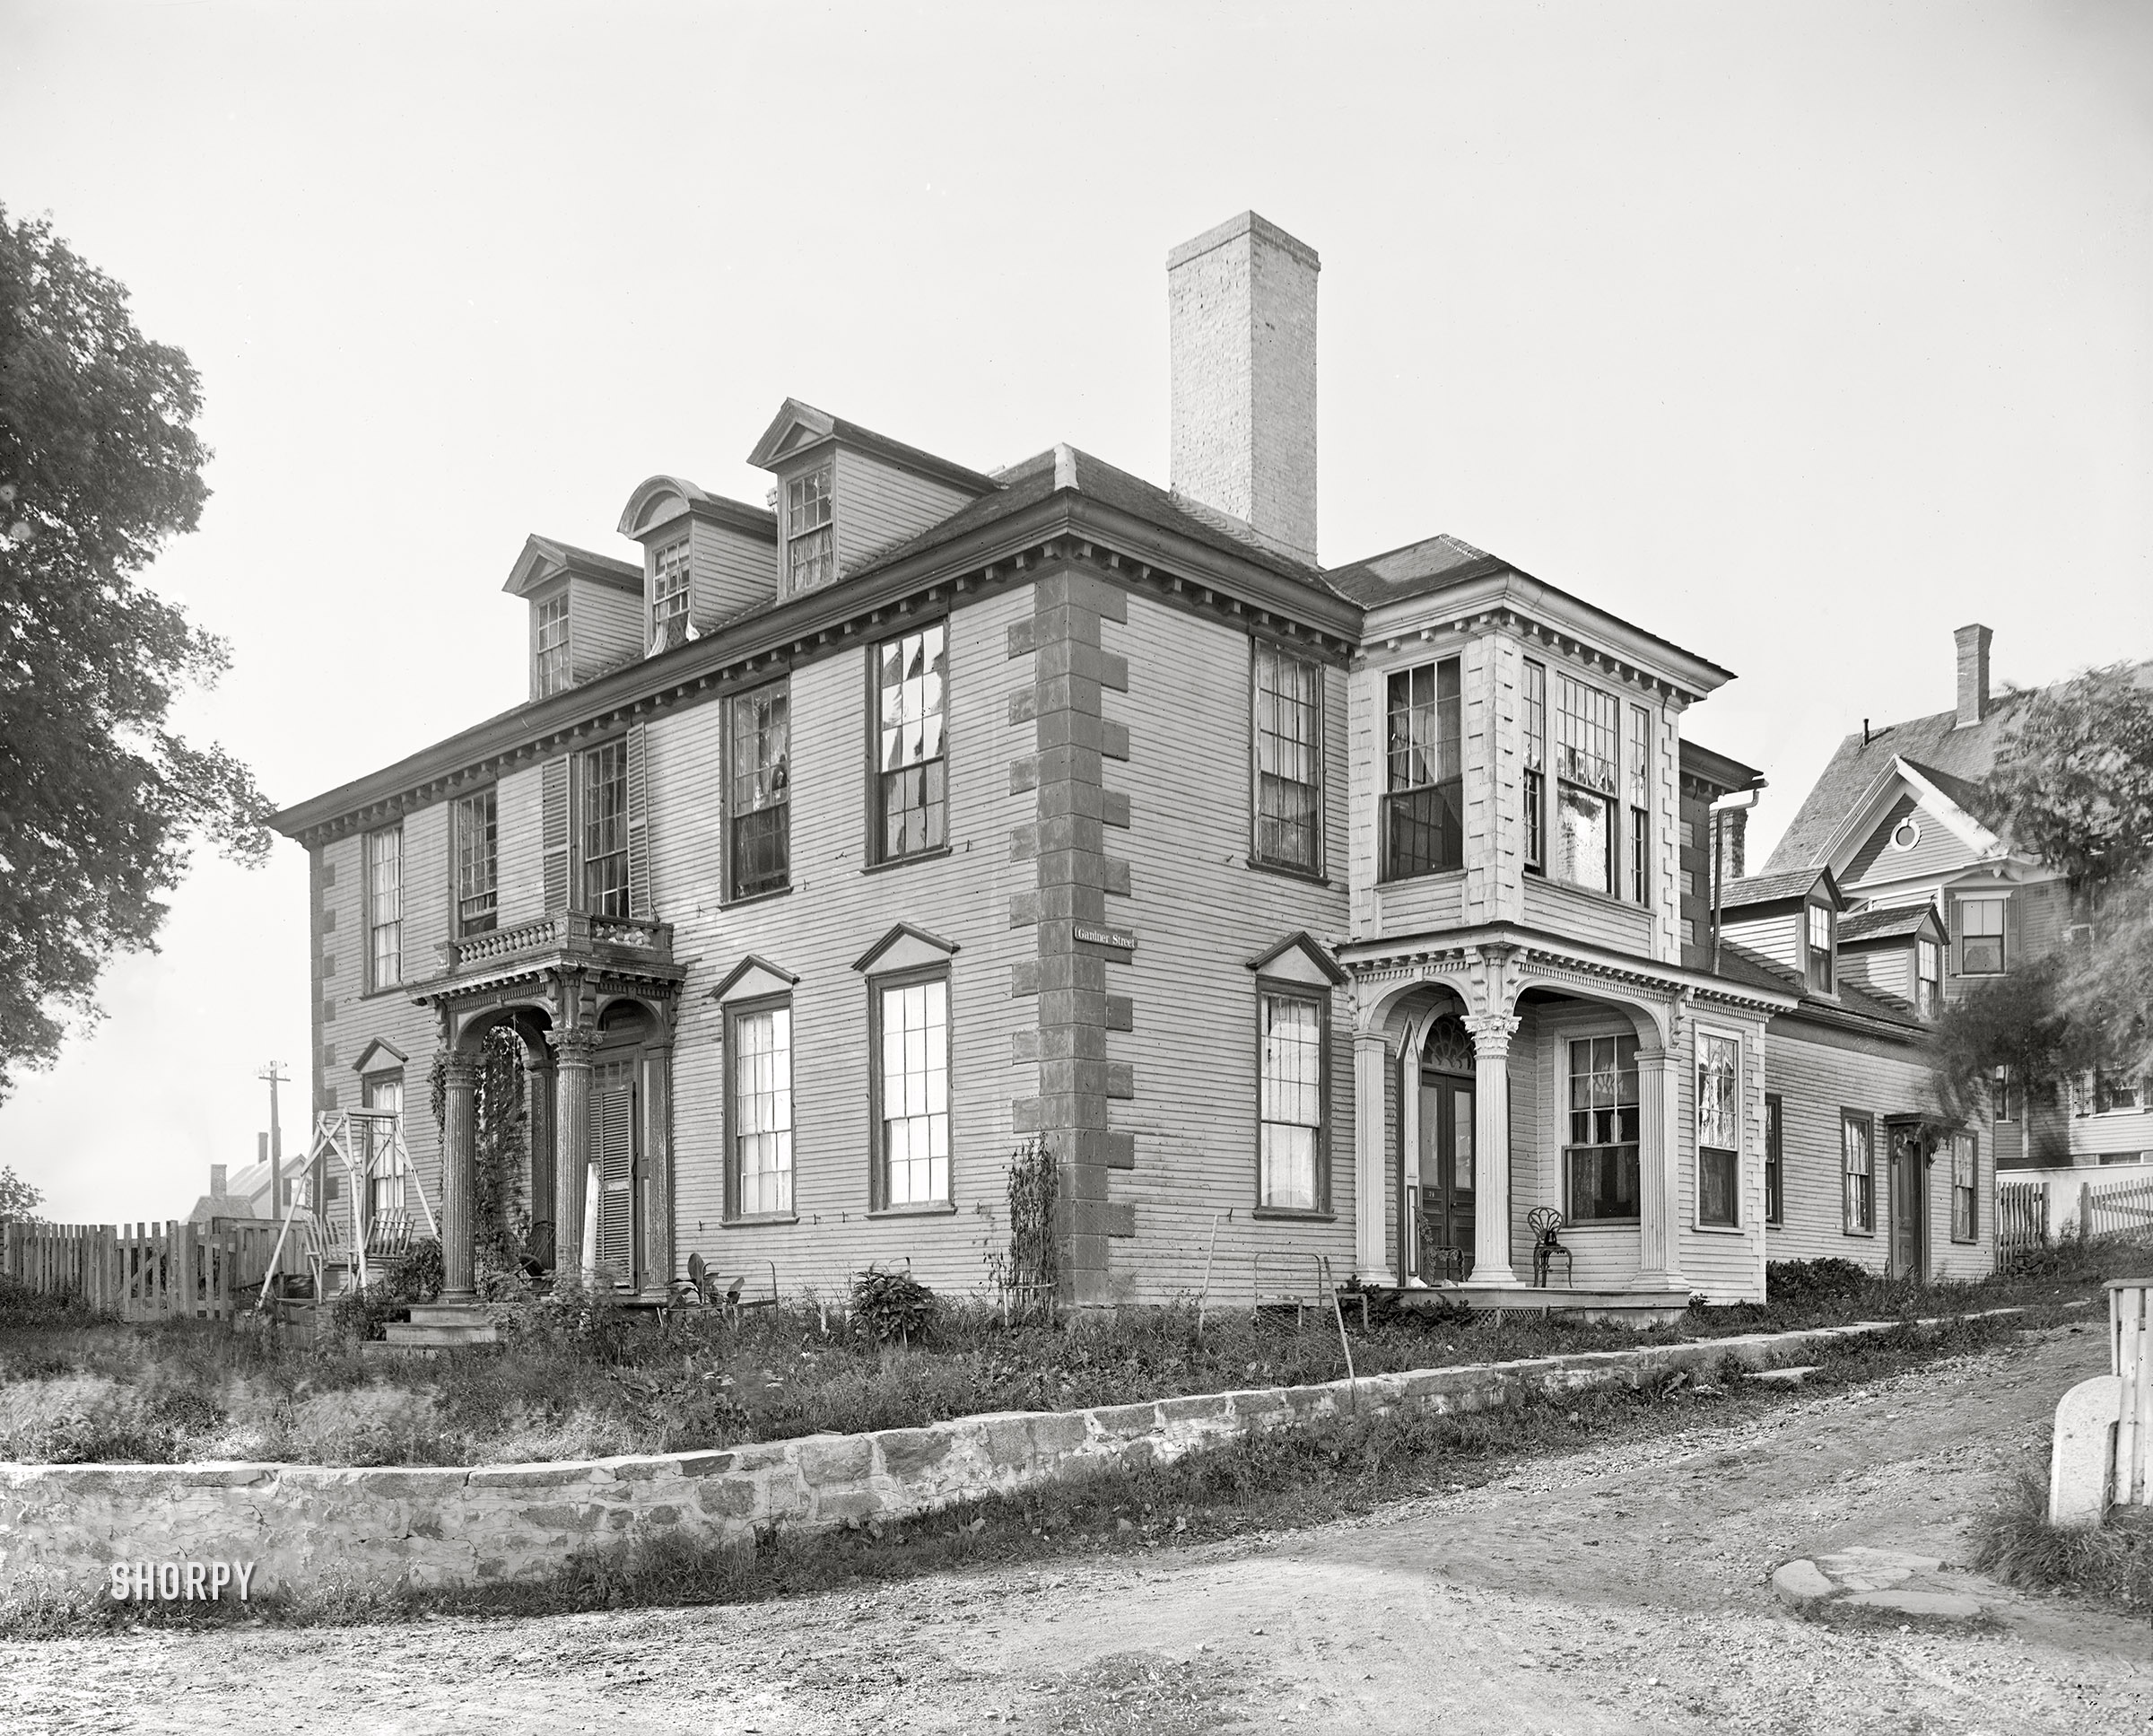 Portsmouth, New Hampshire, circa 1907. "Gardner House." Built in 1760 by Mark Hunking Wentworth, with subsequent additions. 8x10 inch dry plate glass negative. View full size.